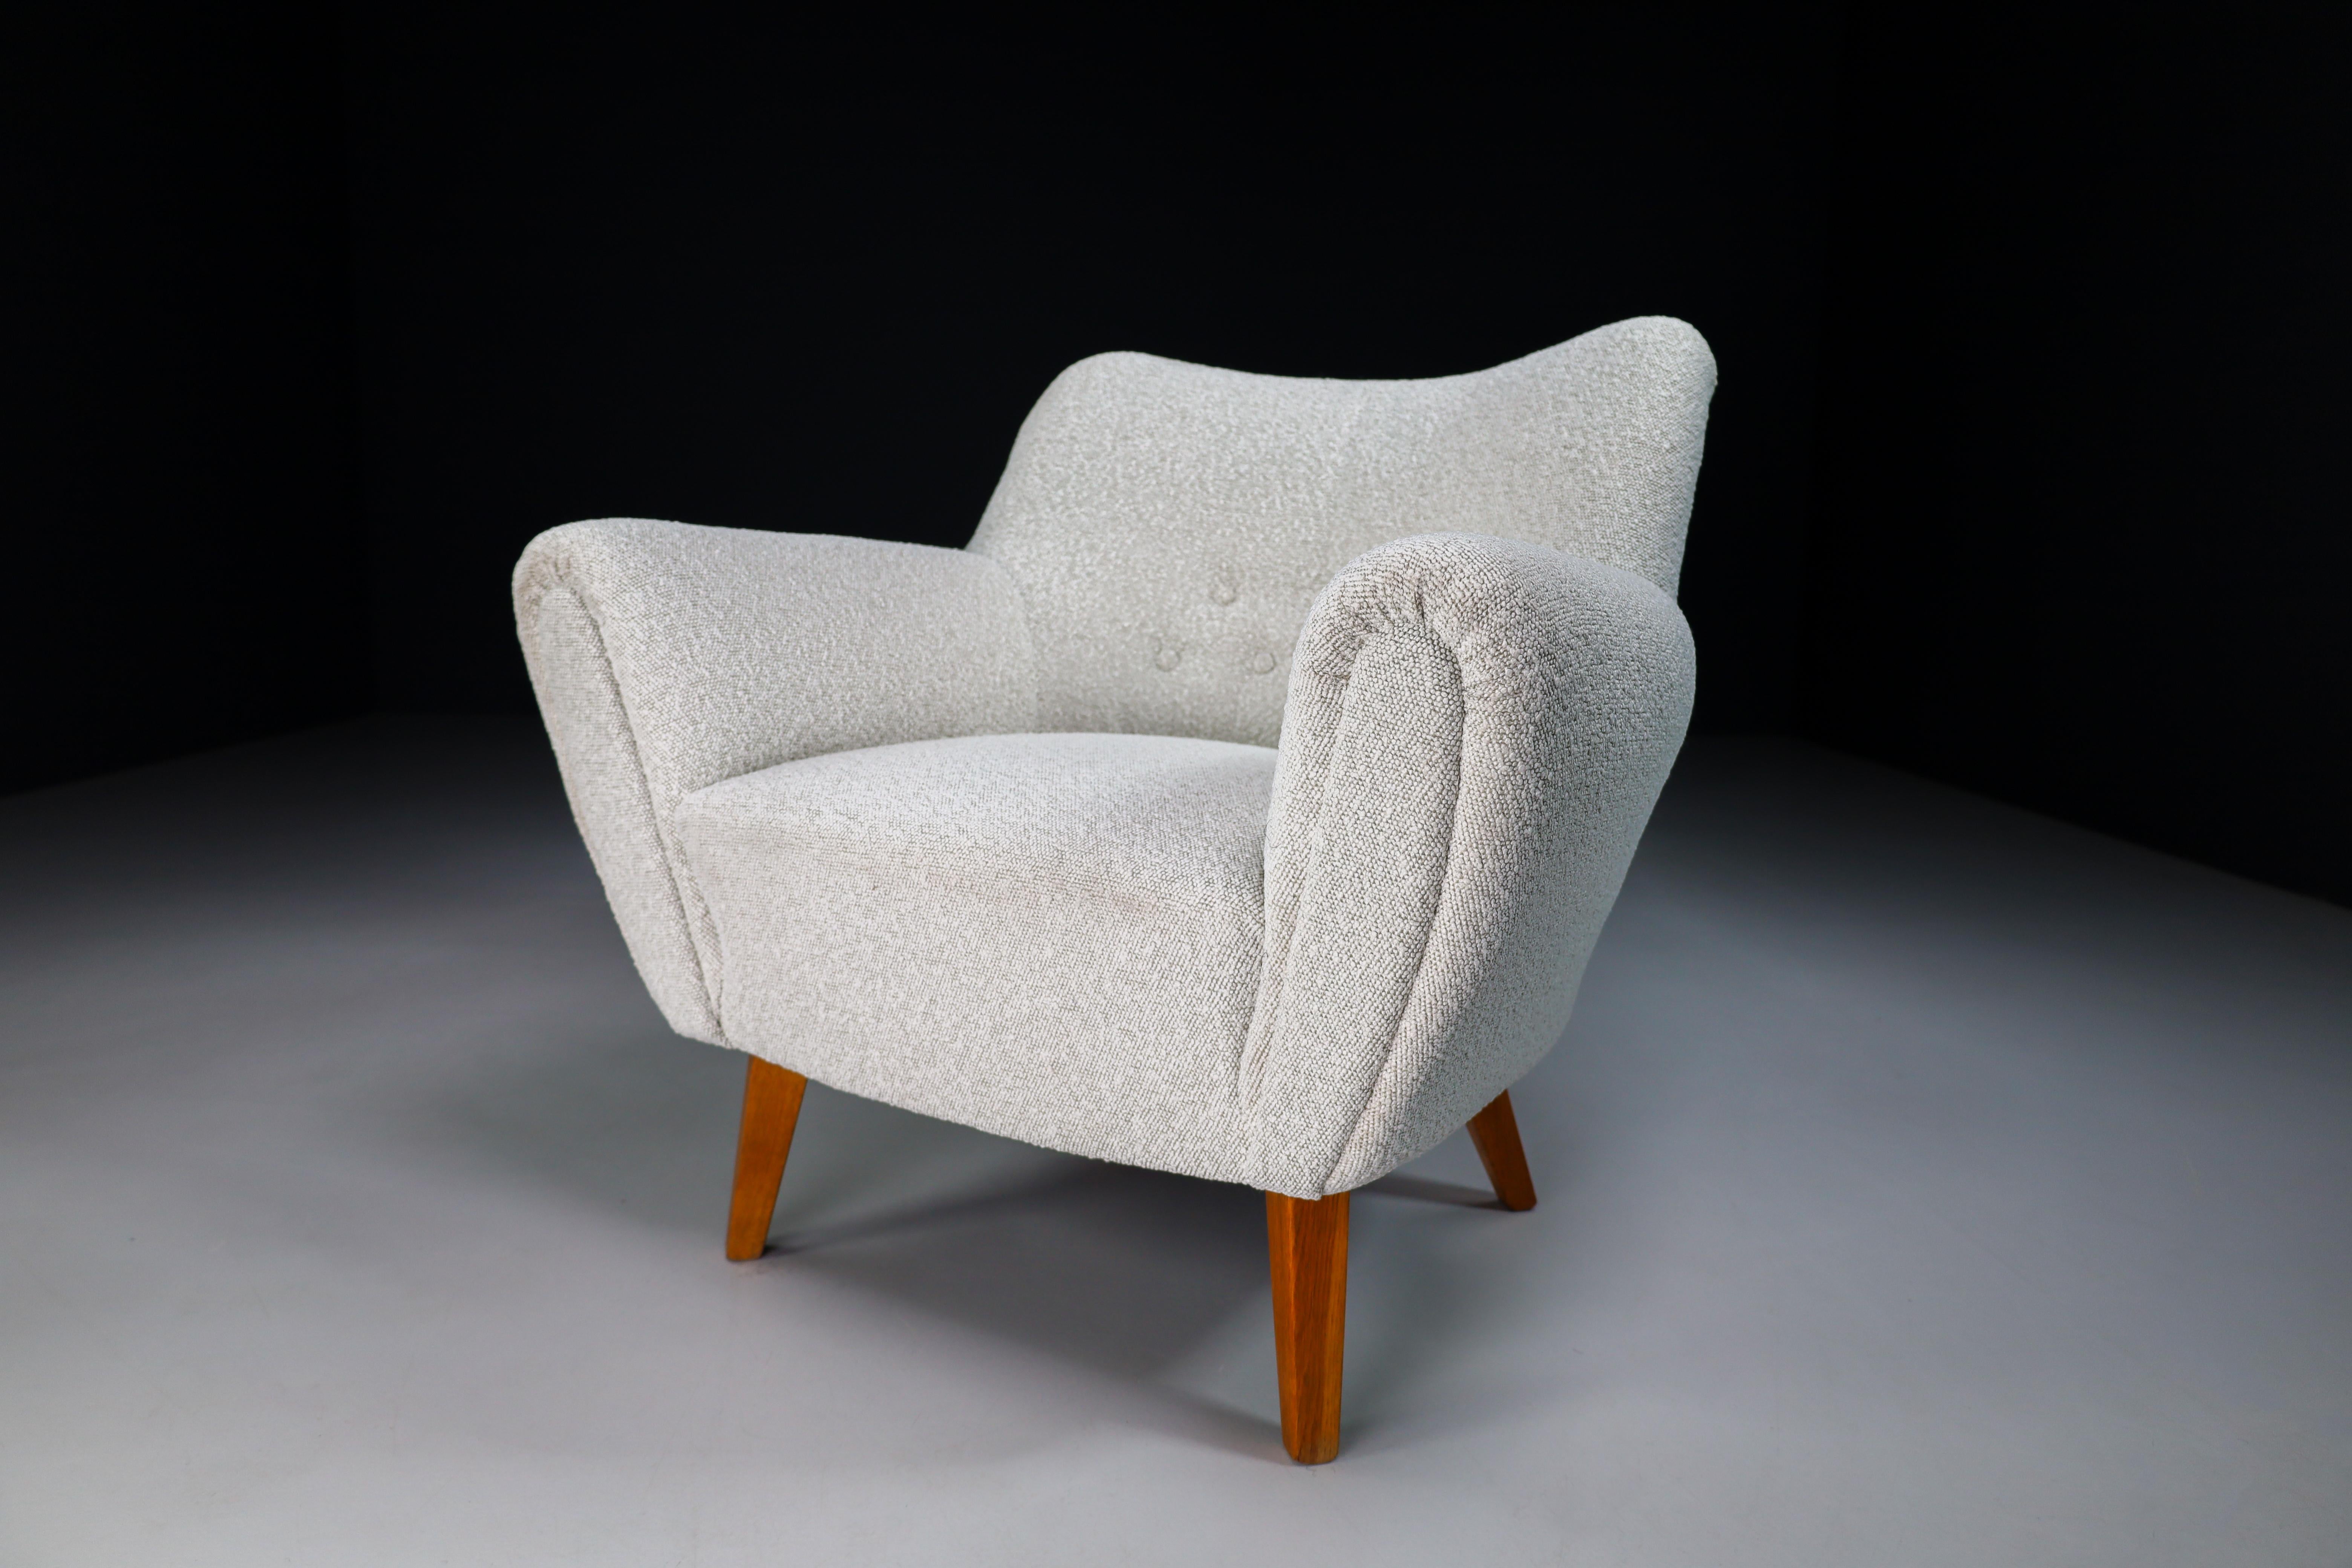 Mid-Century Modern lounge chairs manufactured and designed in France 1950s. Made of french oak and these lounge chair has just been reupholstered with Bouclé fabric. It is in perfect vintage condition, minor patina on wood parts. These amazing